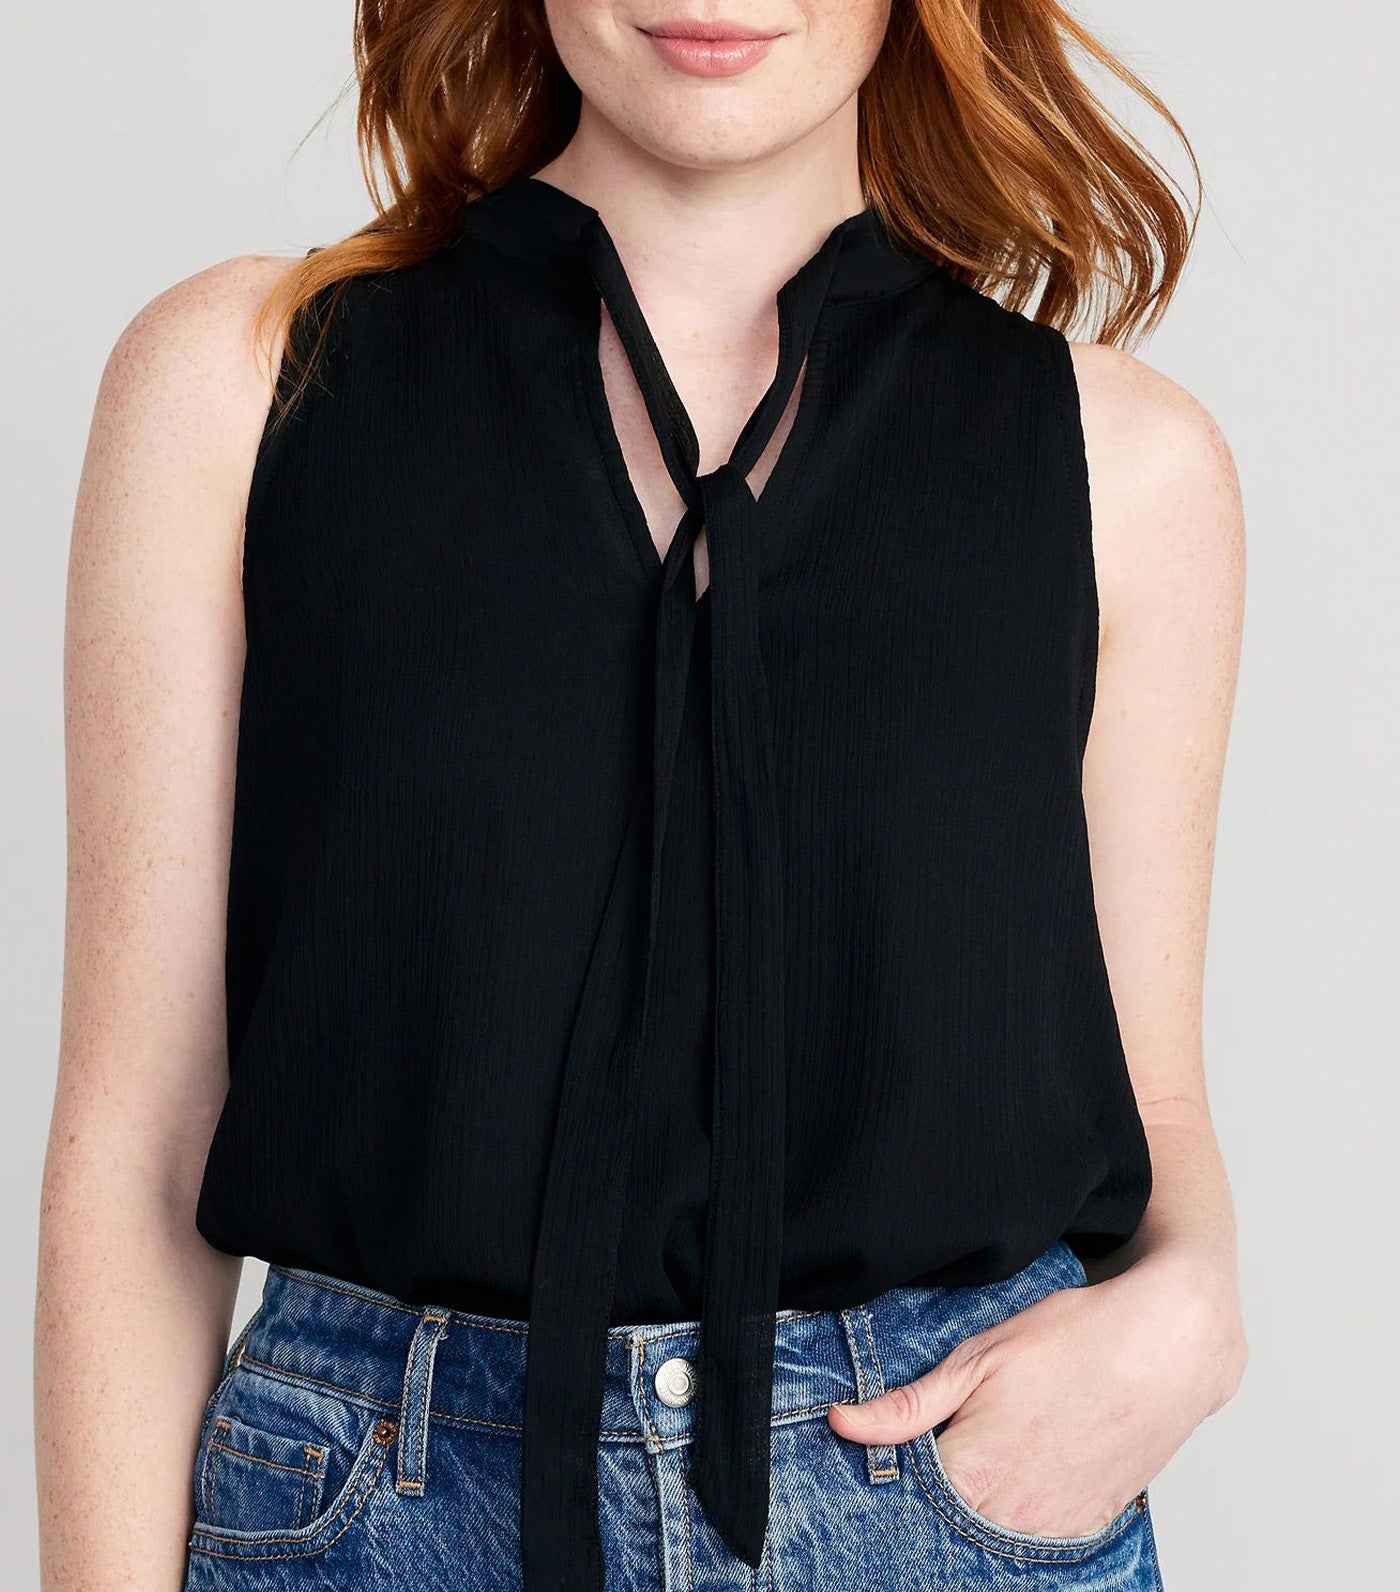 High Neck Bow-Front Chiffon Top for Women Black Jack 2